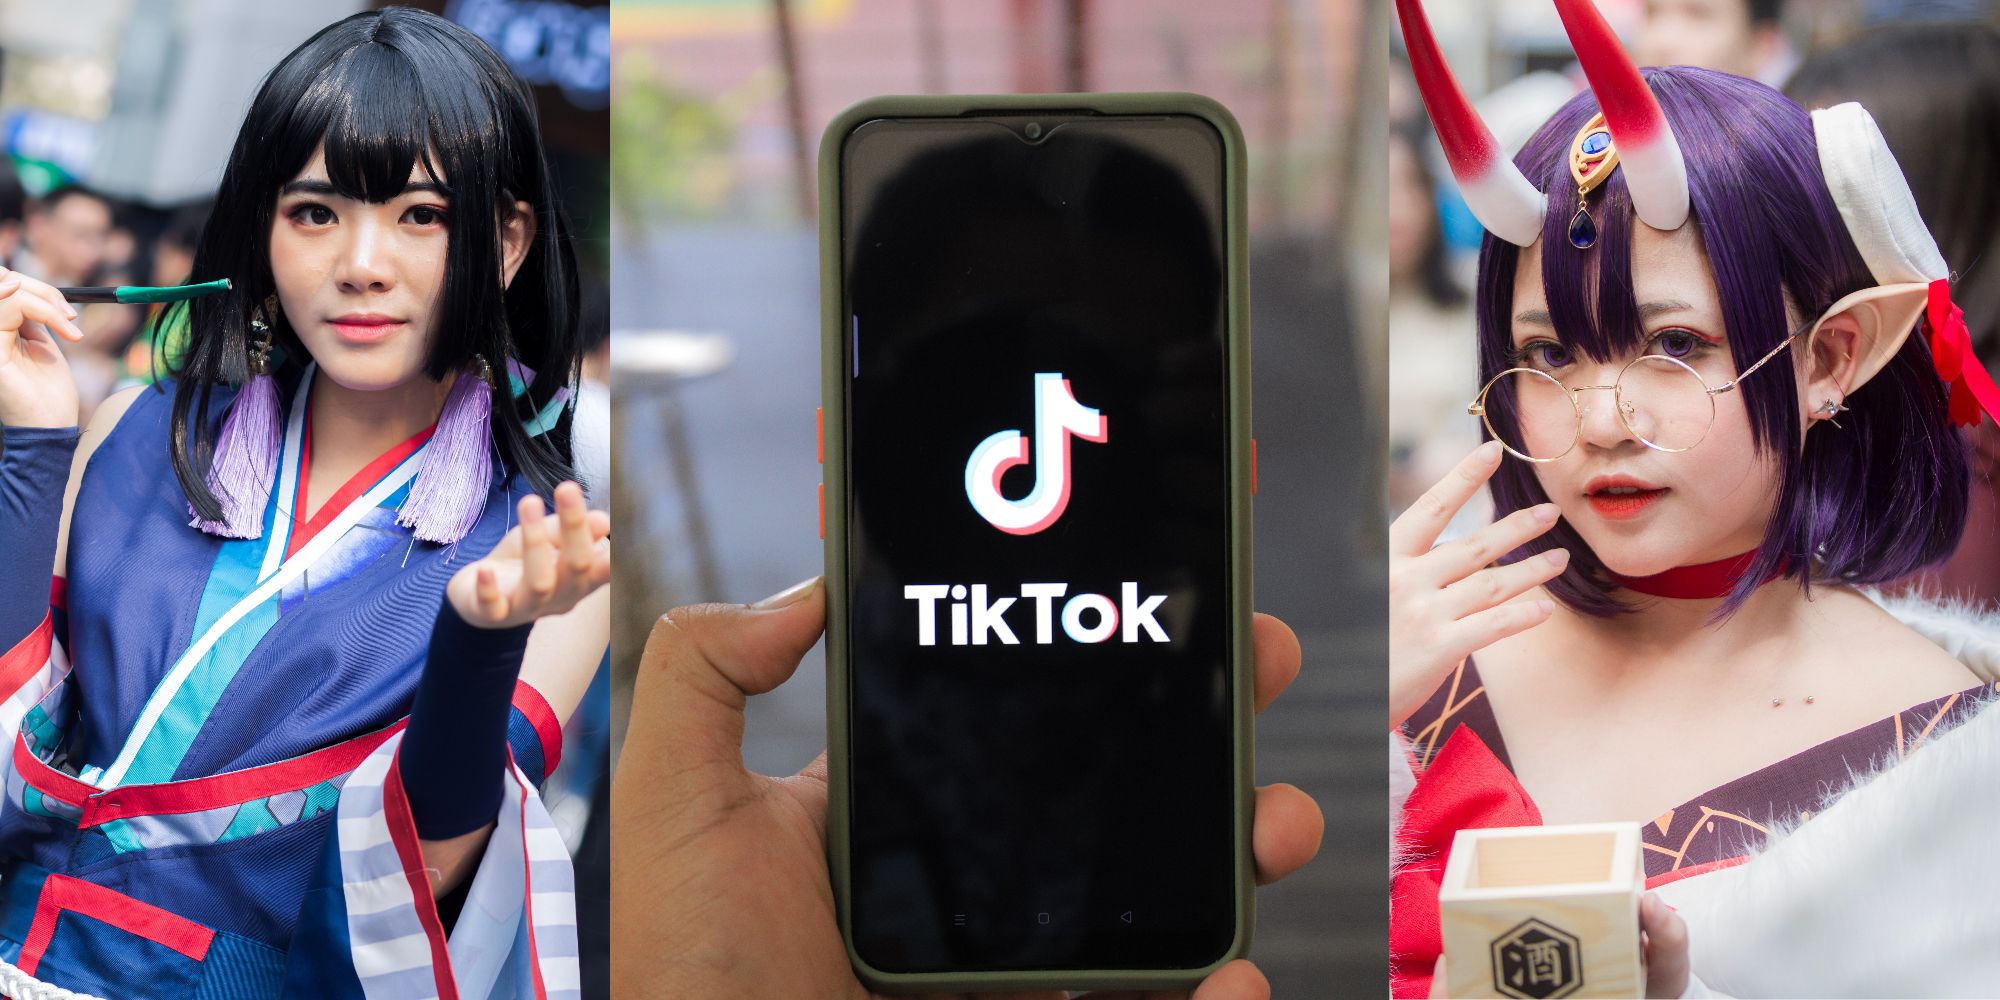 A phone with the TikTok logo is shown between two girls in intricate, colorful cosplay. 